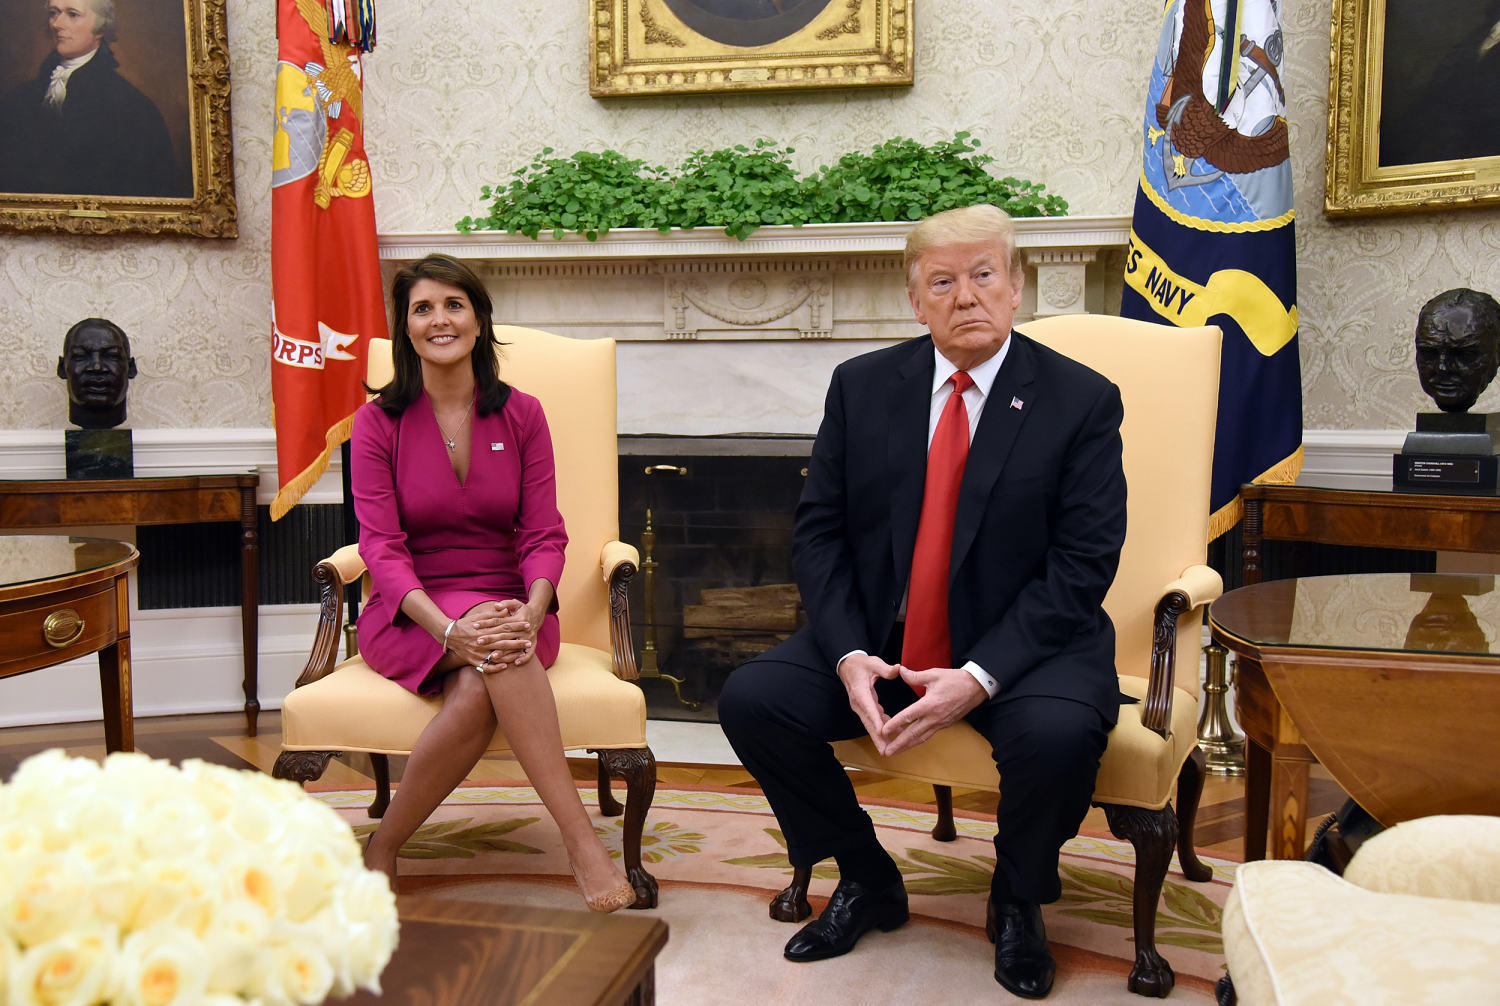 Targeting Haley, Trump isn’t quite done with birther offensive